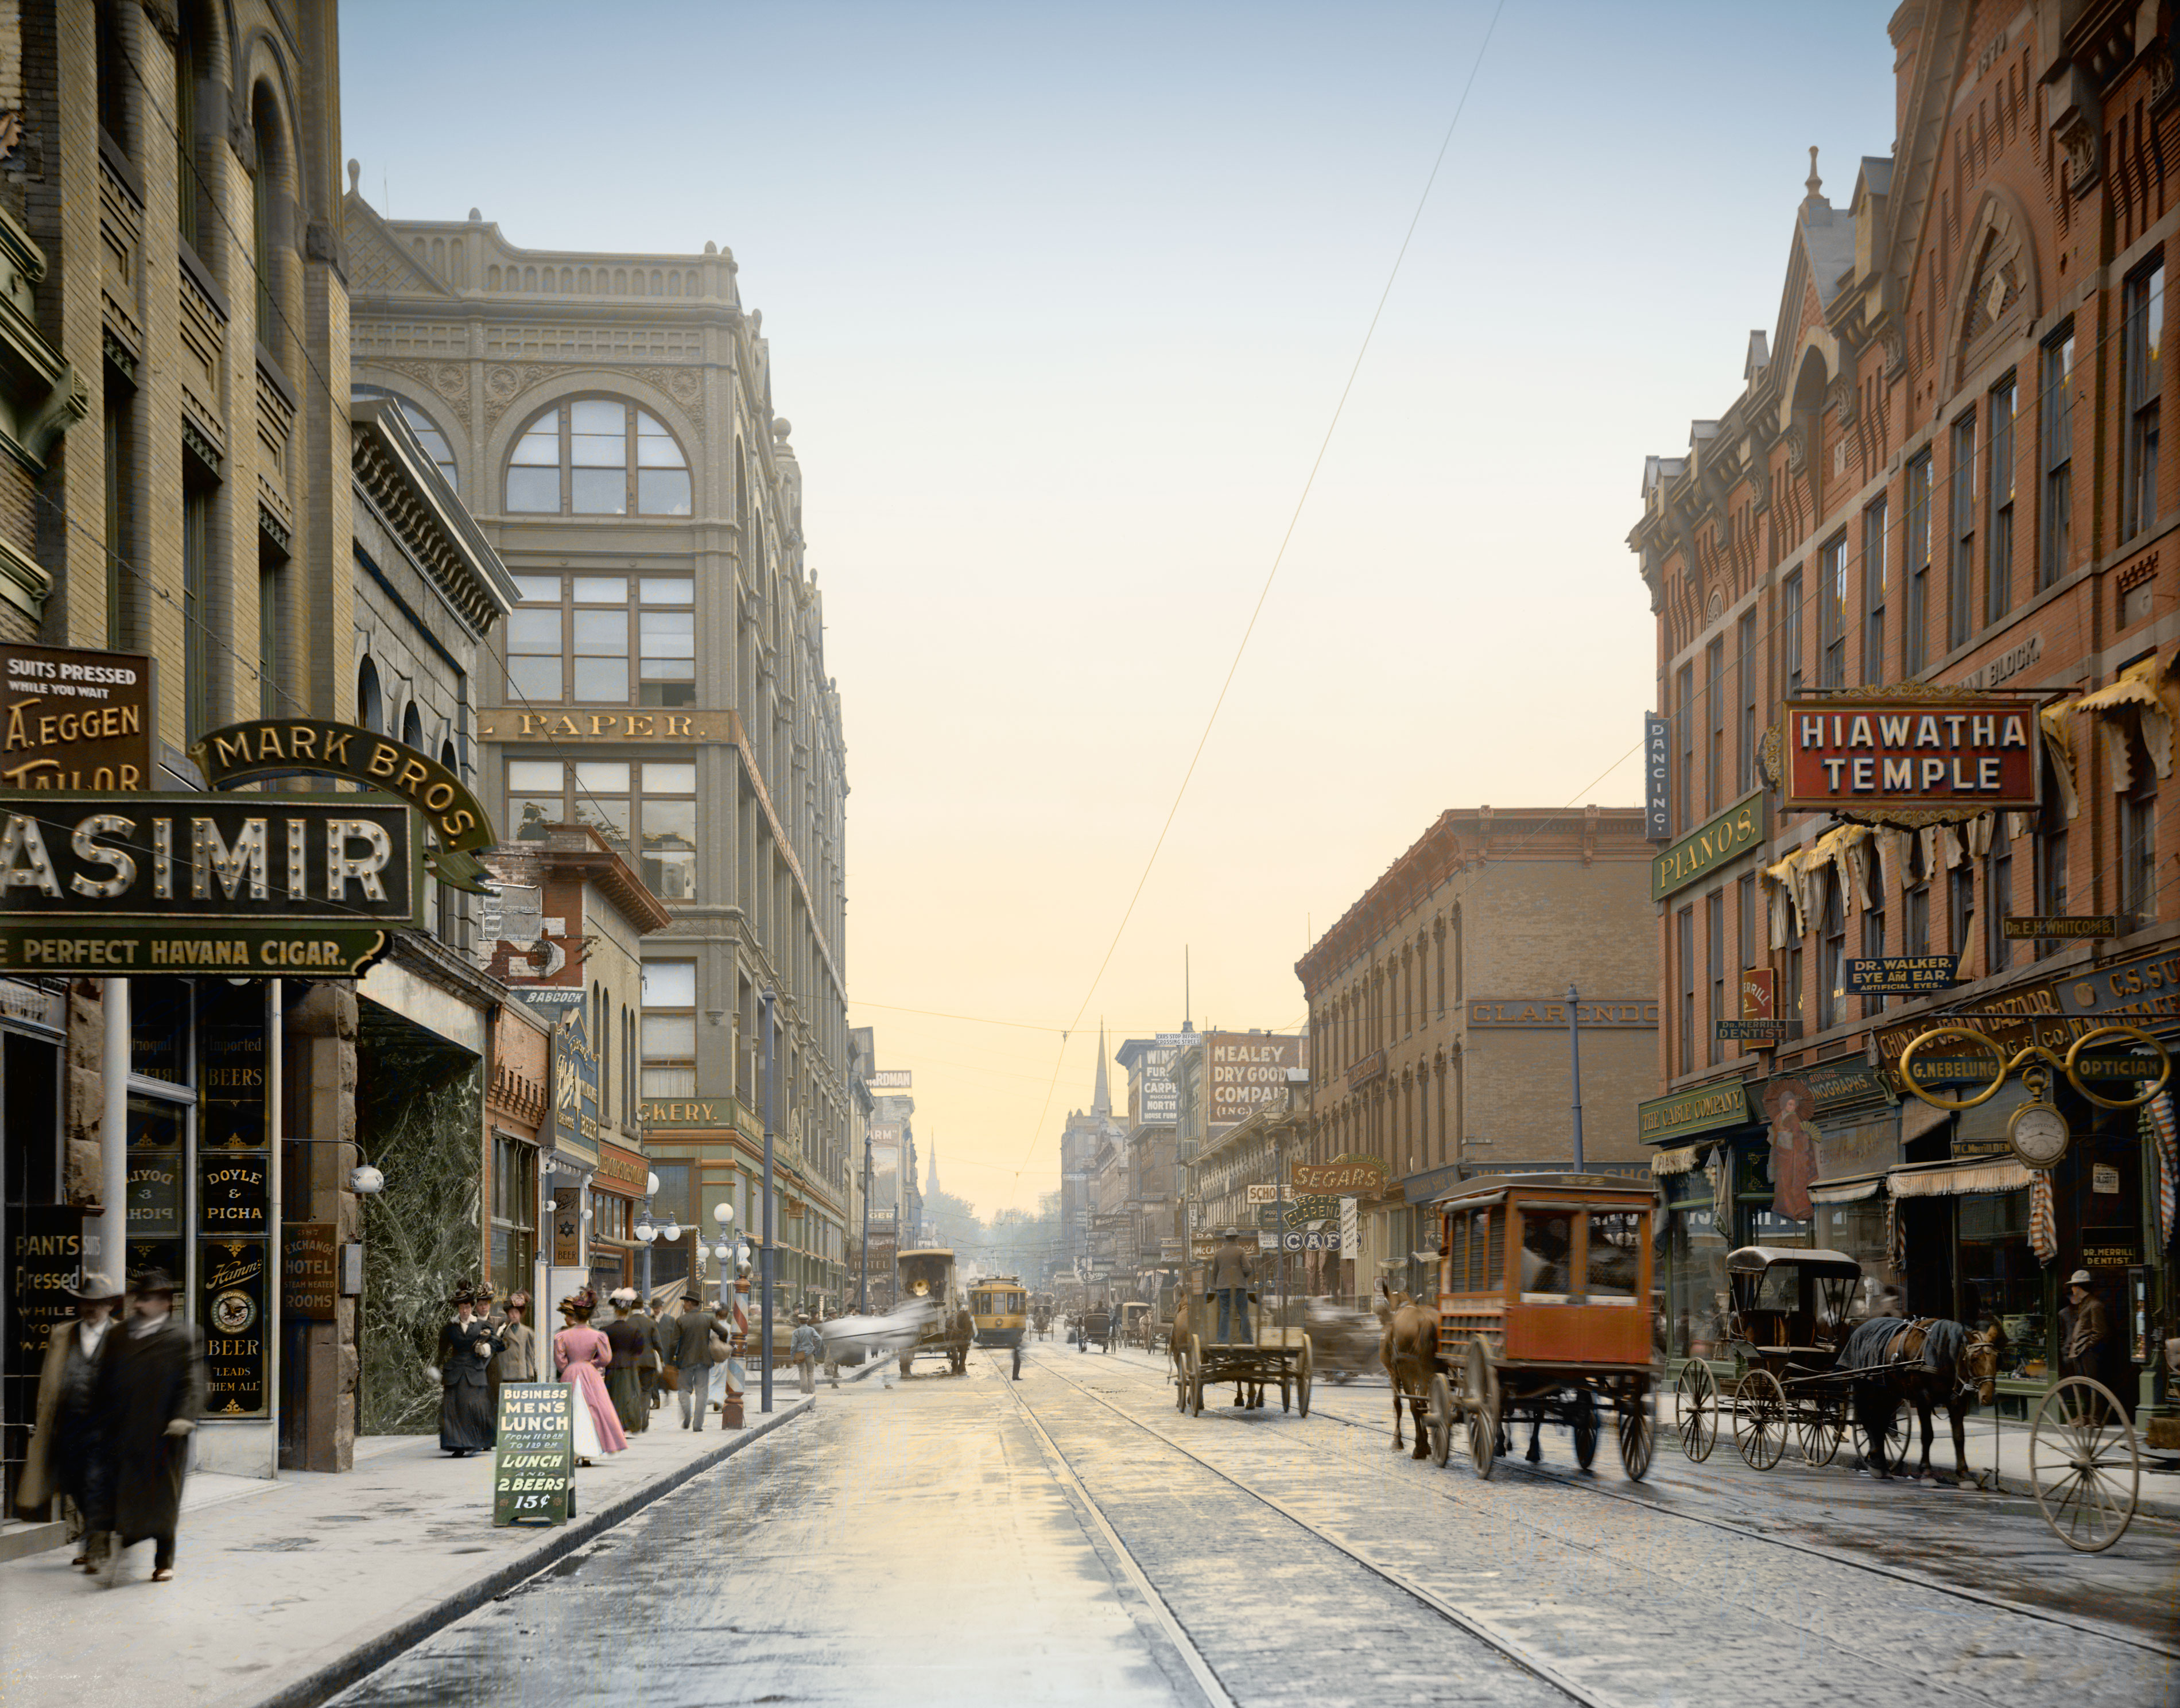 St. Paul, Minnesota, circa 1908. "Wabasha Street." The early 20th century was a golden age of signcraft. Gilded wooden letters and 24K gold leaf window treatments were standard. Several classic lettering manuals were published during this time, with graphic styles influenced by Victorian ornament and the Art Nouveau movement. To an ex-sign painter (a profession killed by the computer, alas), Wabasha Street is a candy store. This is how I imagine it looked, a chilly morning in St. Paul one hundred years ago. Keen-eyed Shorpians may notice a couple of small modifications to the original photograph. View full size.